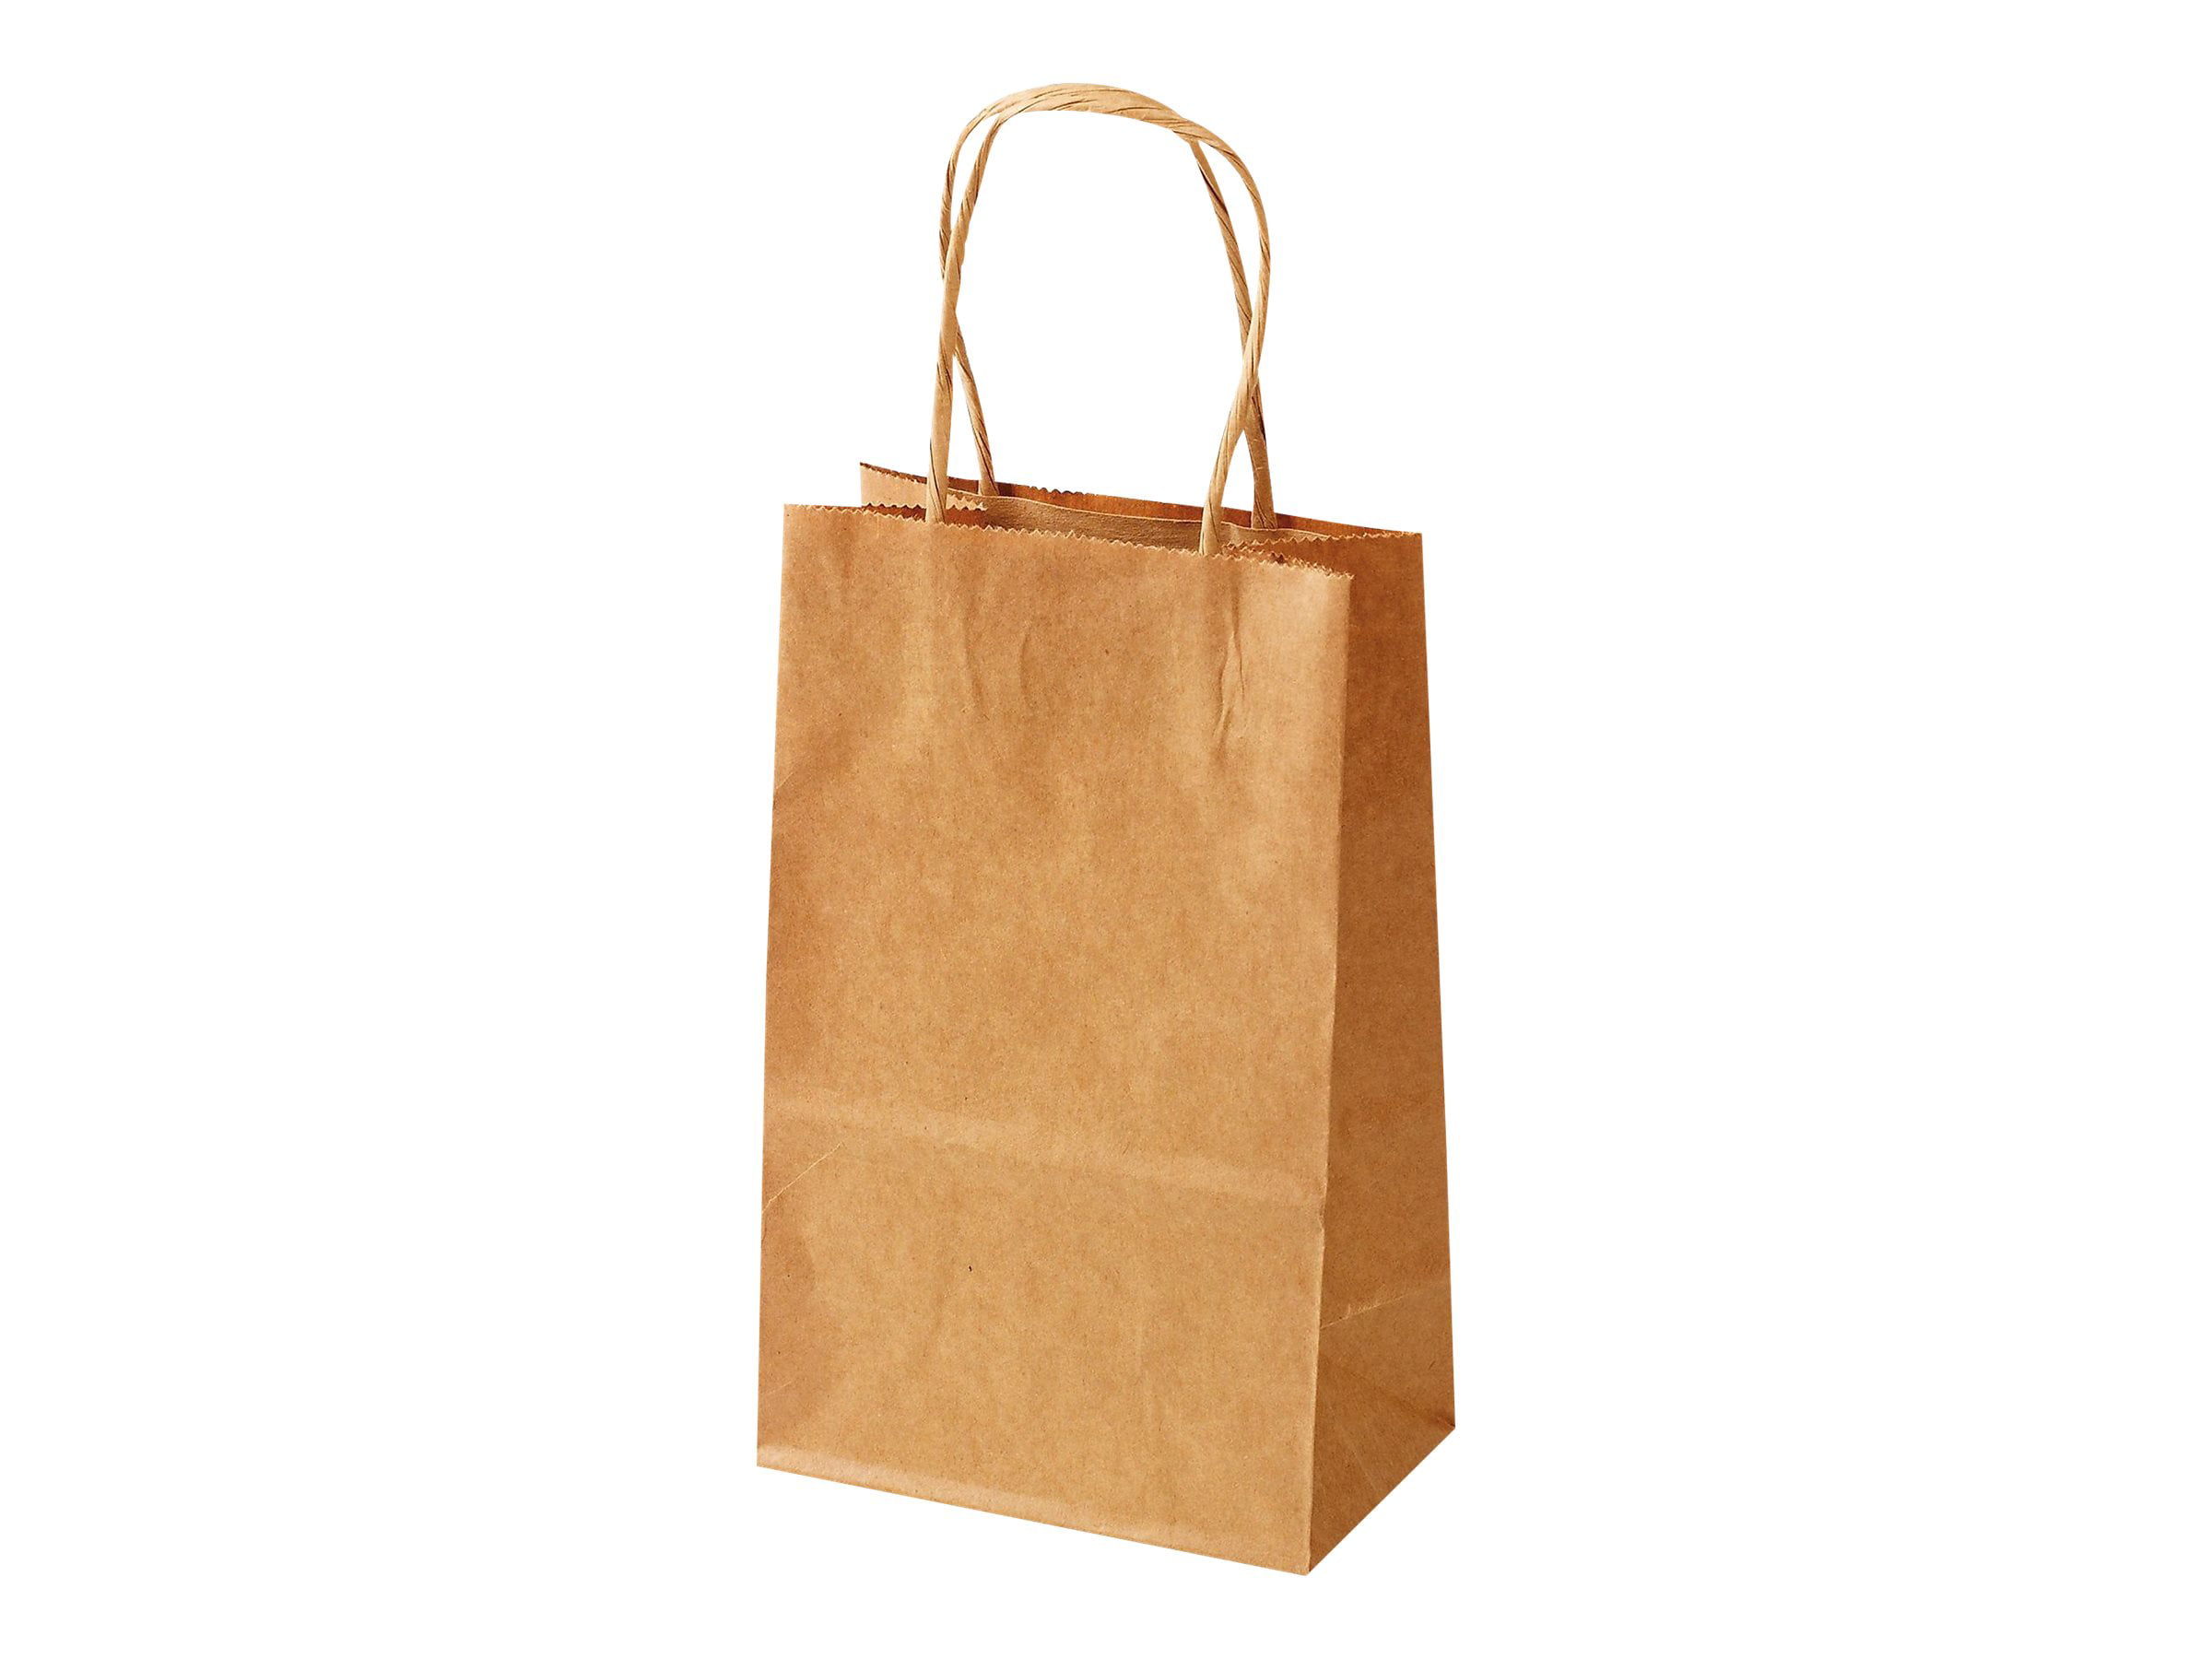 Boulevard String Shopping Bag made from recycled unbleached cotton,Short Handles 